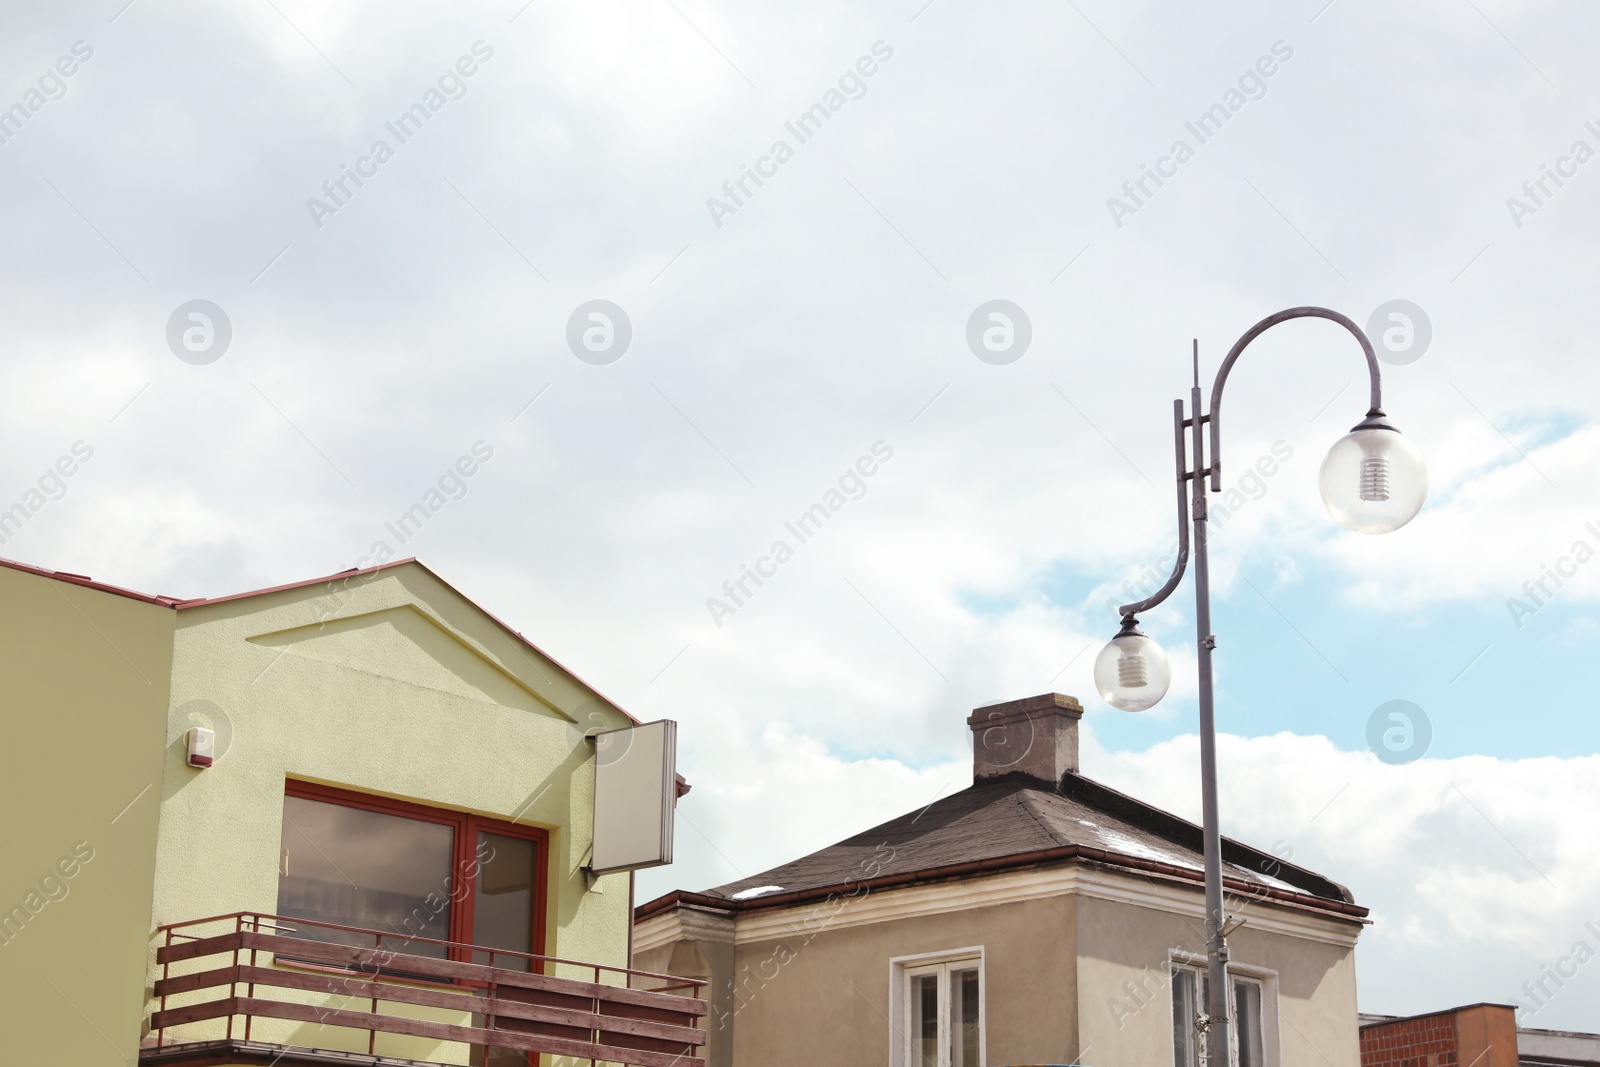 Photo of Beautiful street lamp with glass globes outdoors